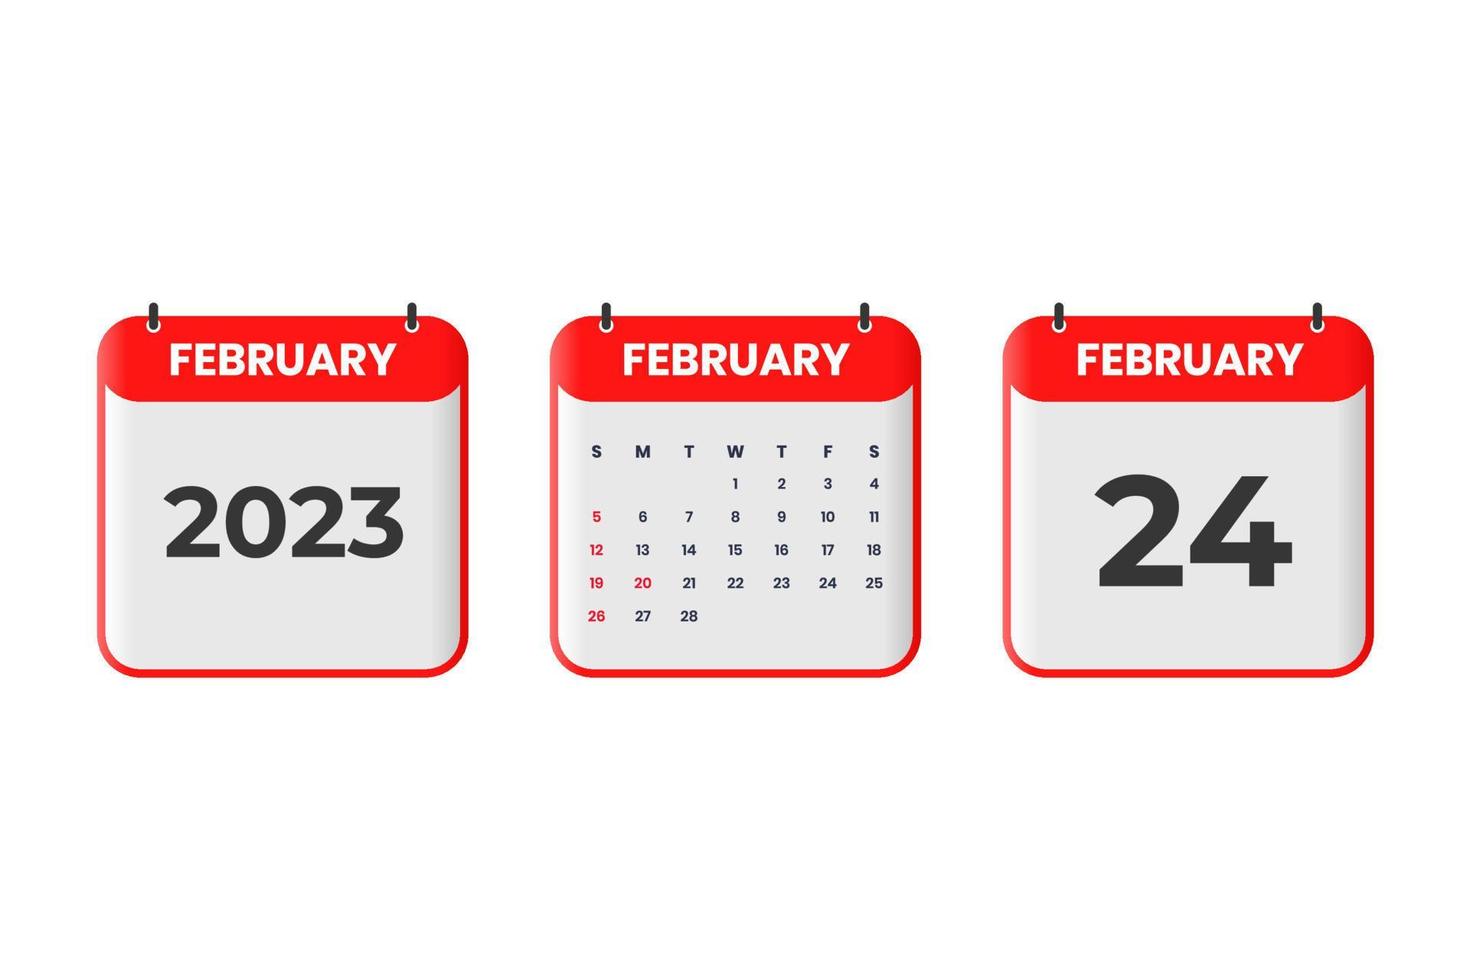 February 2023 calendar design. 24th February 2023 calendar icon for schedule, appointment, important date concept vector